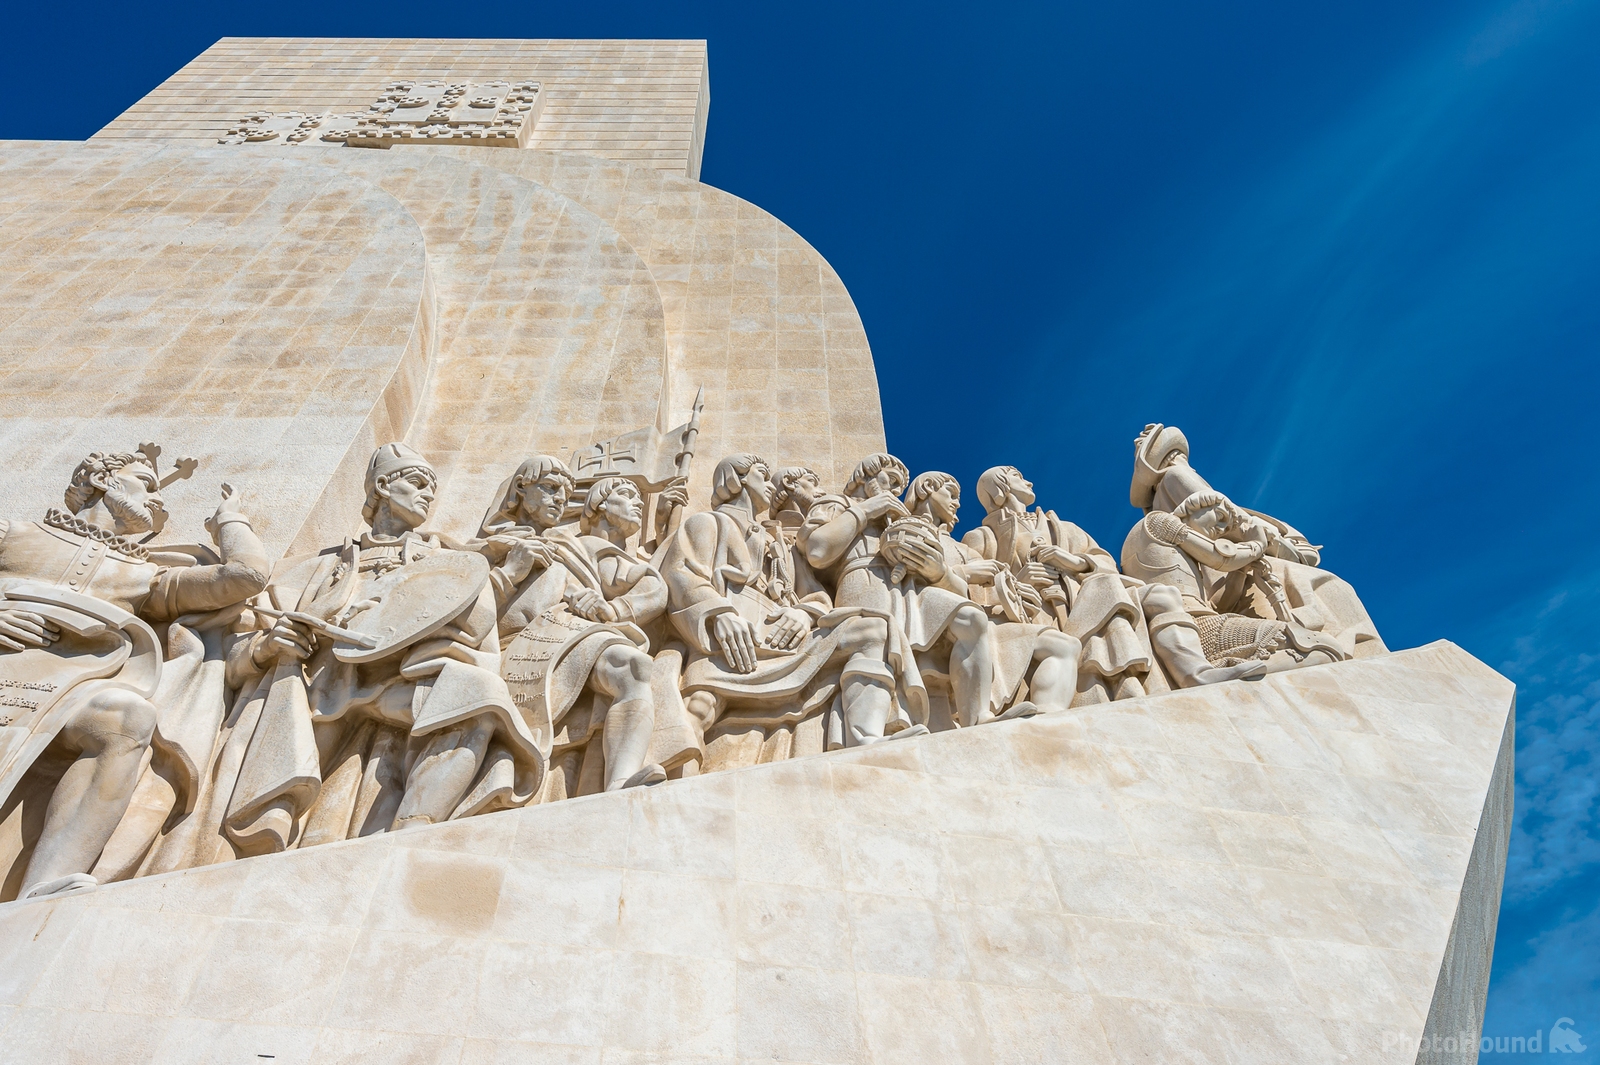 Image of Monument to the Discoveries by Sue Wolfe